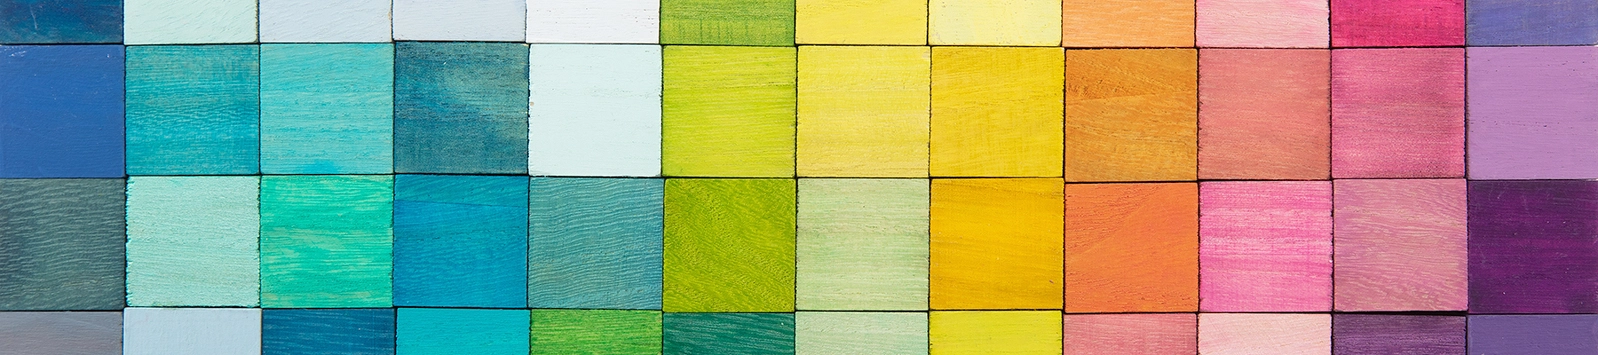 Grid of colorful wooden blocks